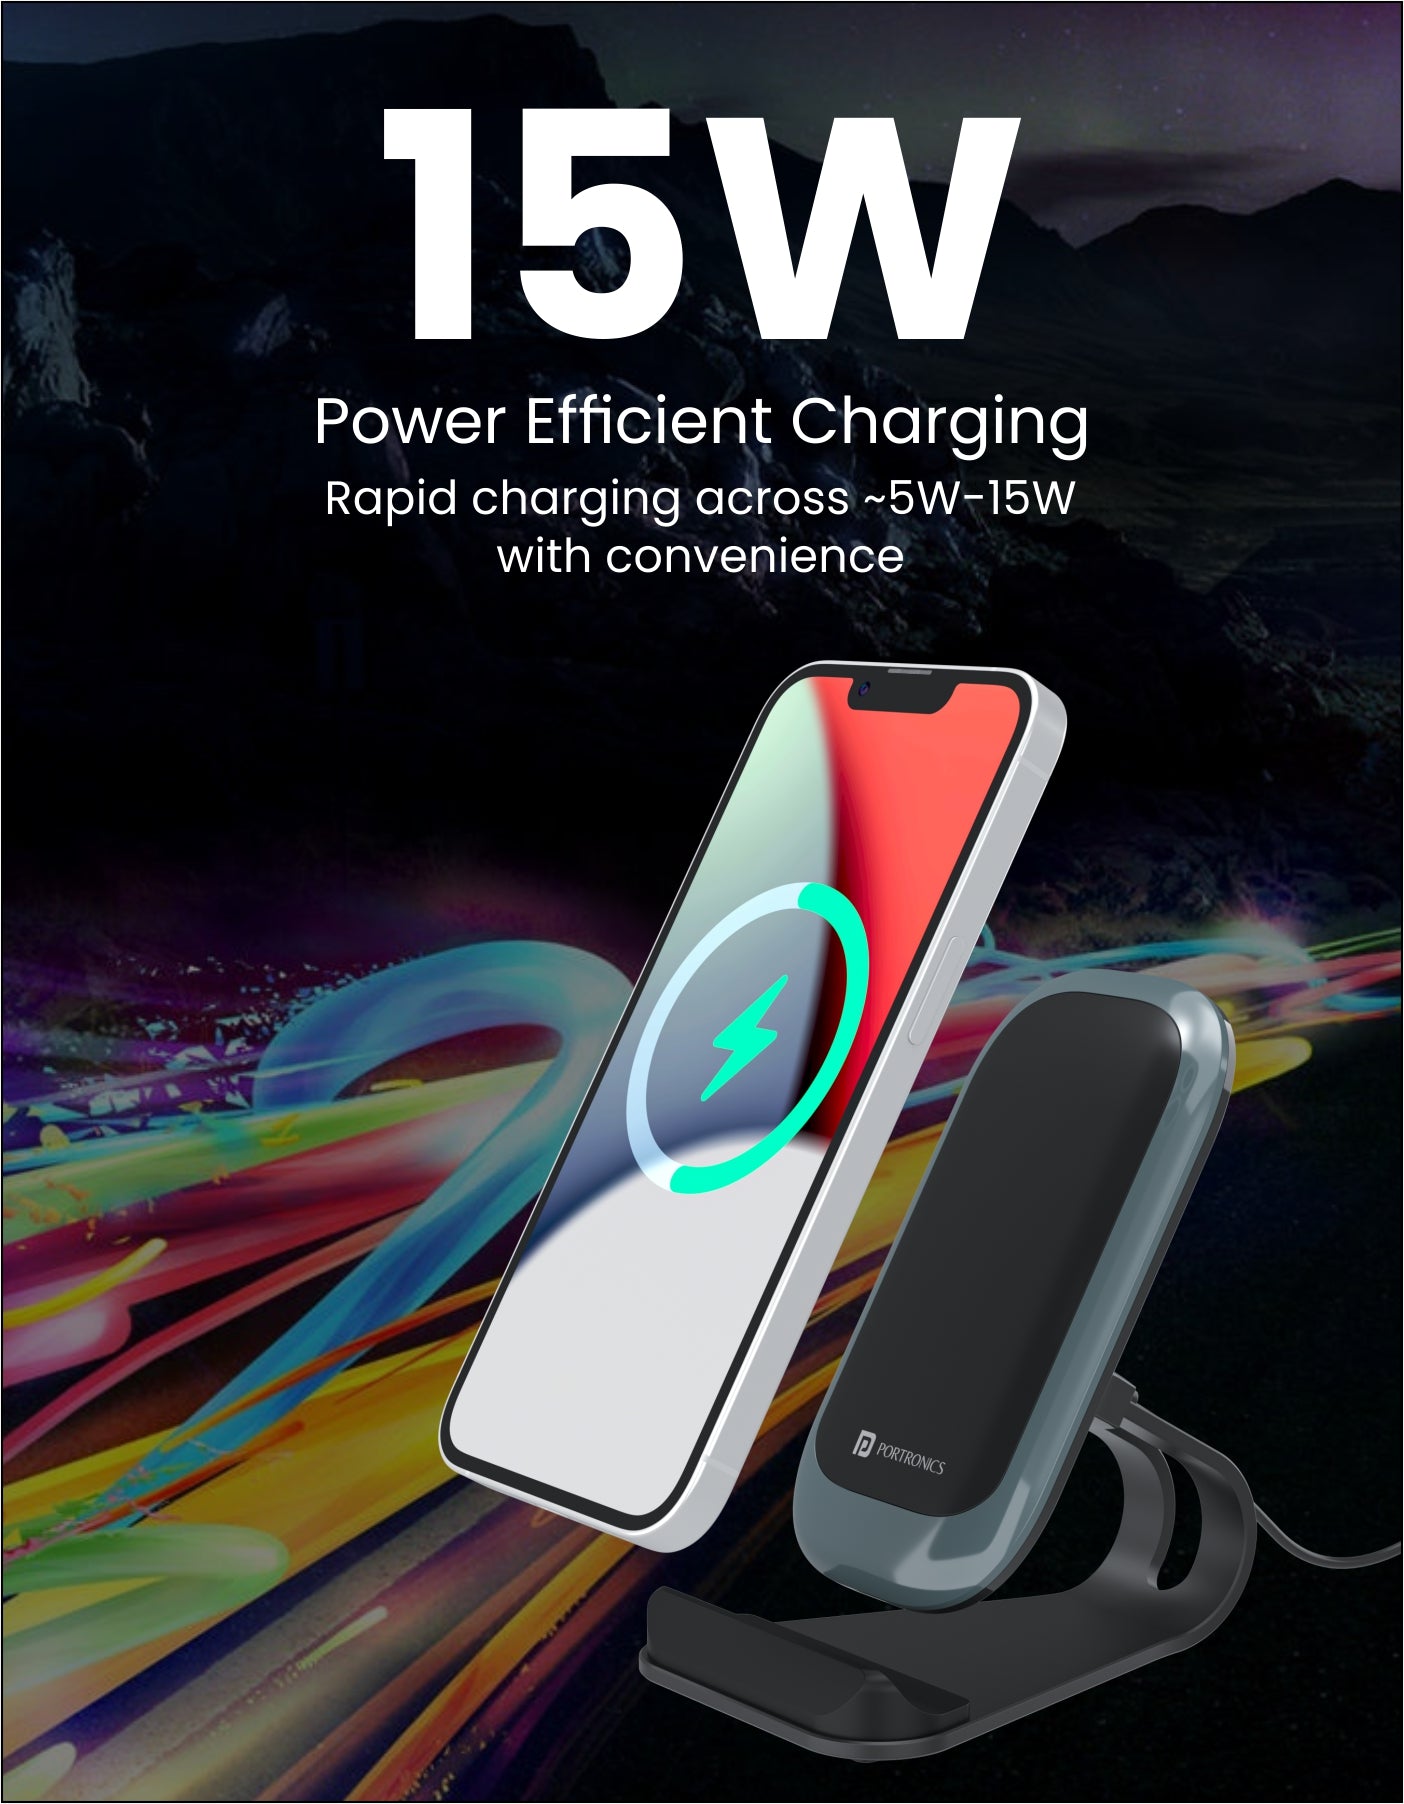 Portronics Freedom 15 Double Coil 15W Wireless Charger rapid charge 5W to 15W